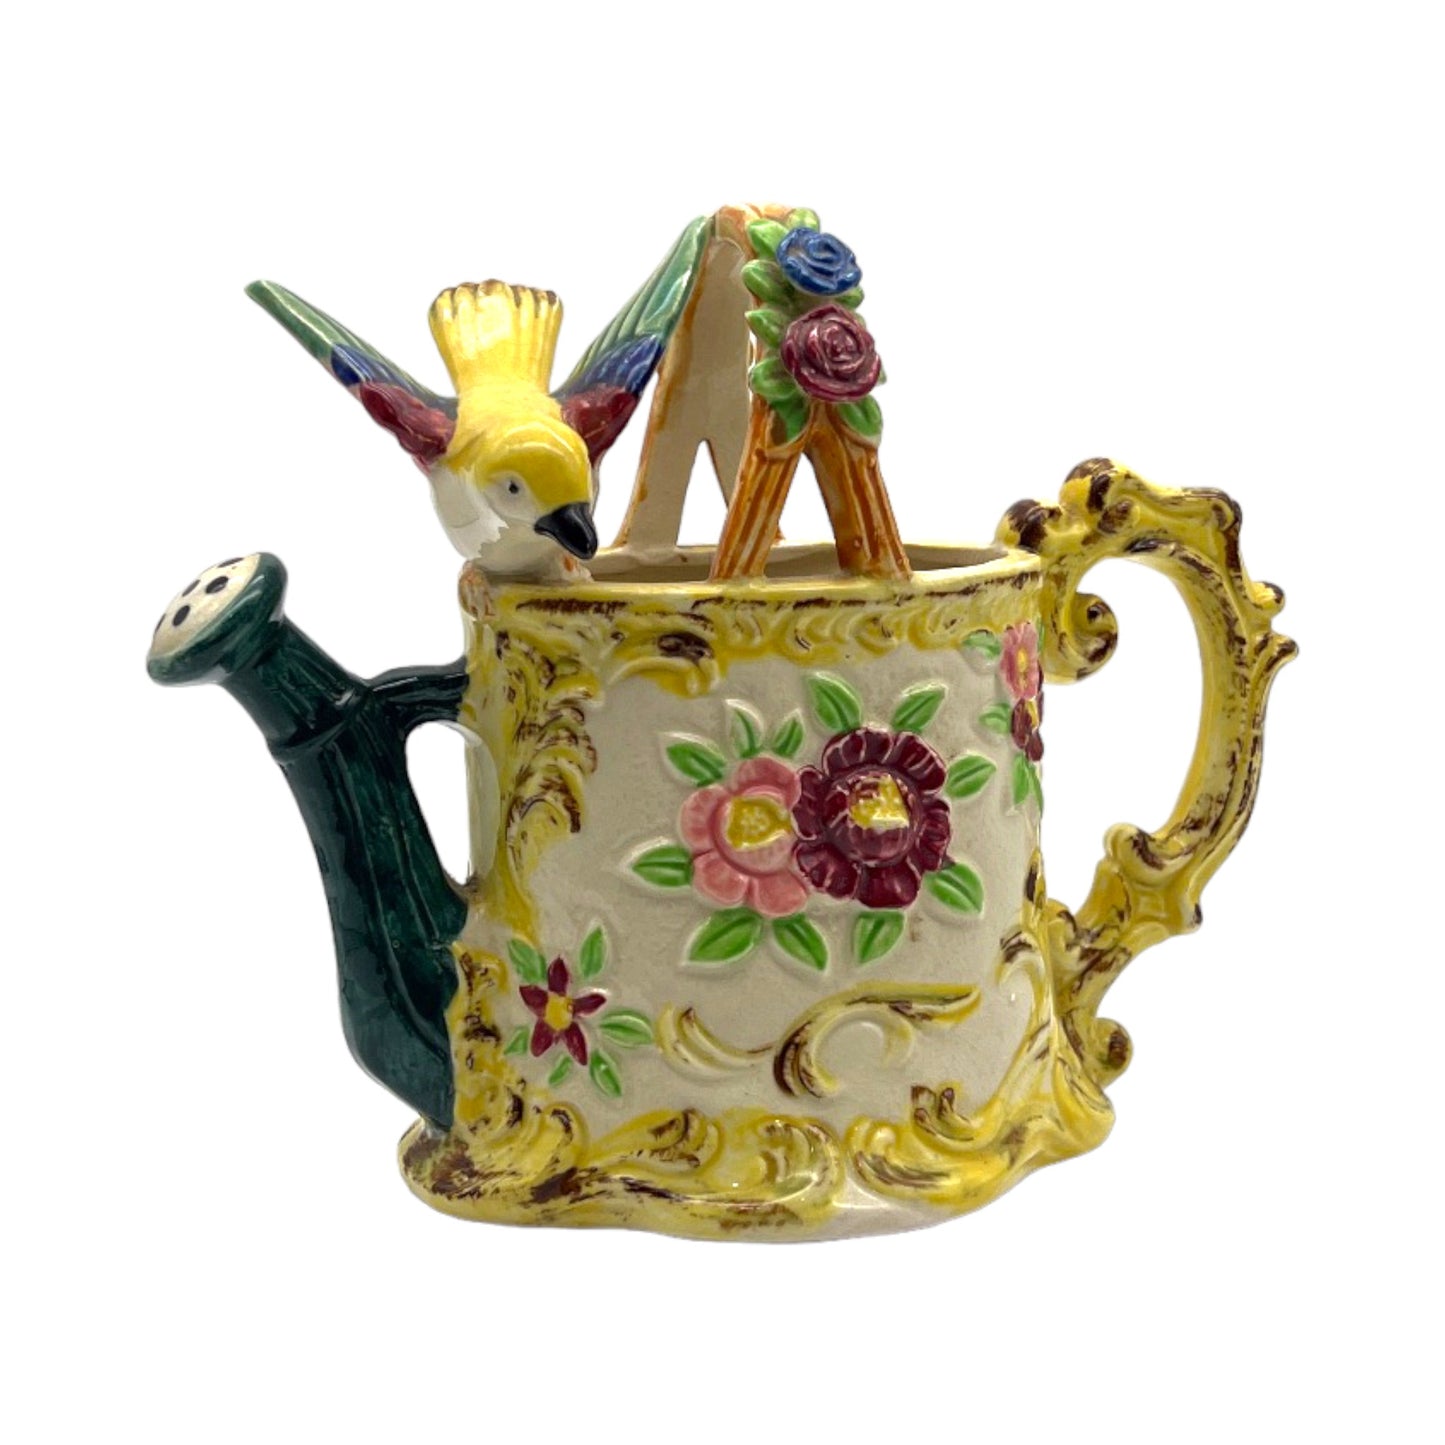 Teapot Basket With Bird - Hand Painted - Vintage - 7"